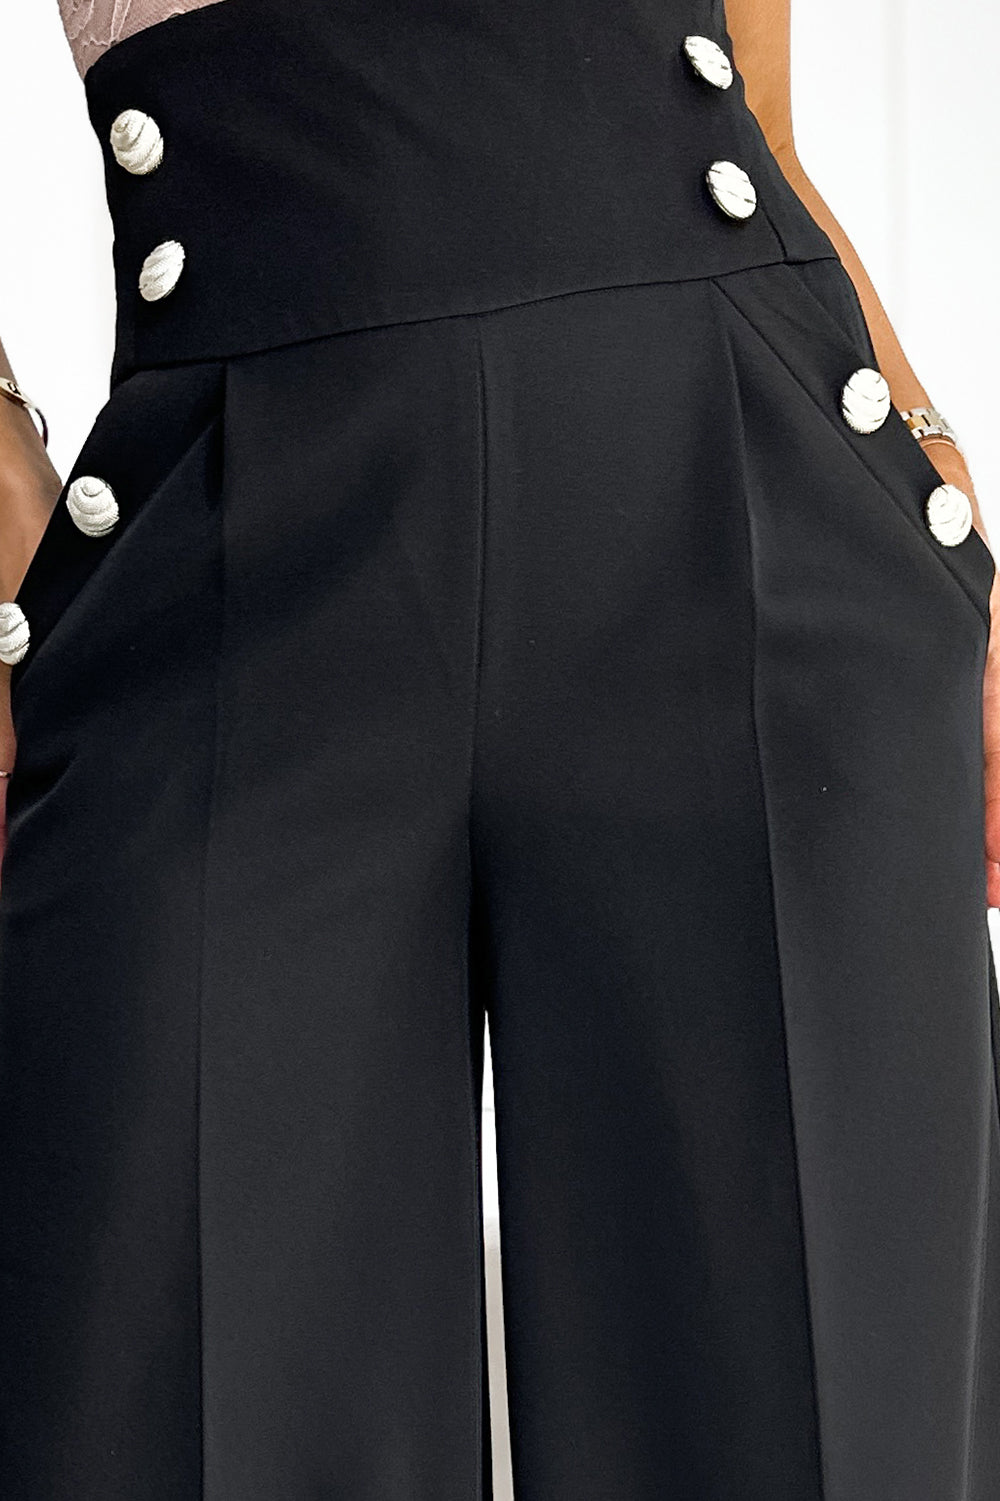 18341-6-496-1 Elegant wide pants with high waist and golden buttons - black-6